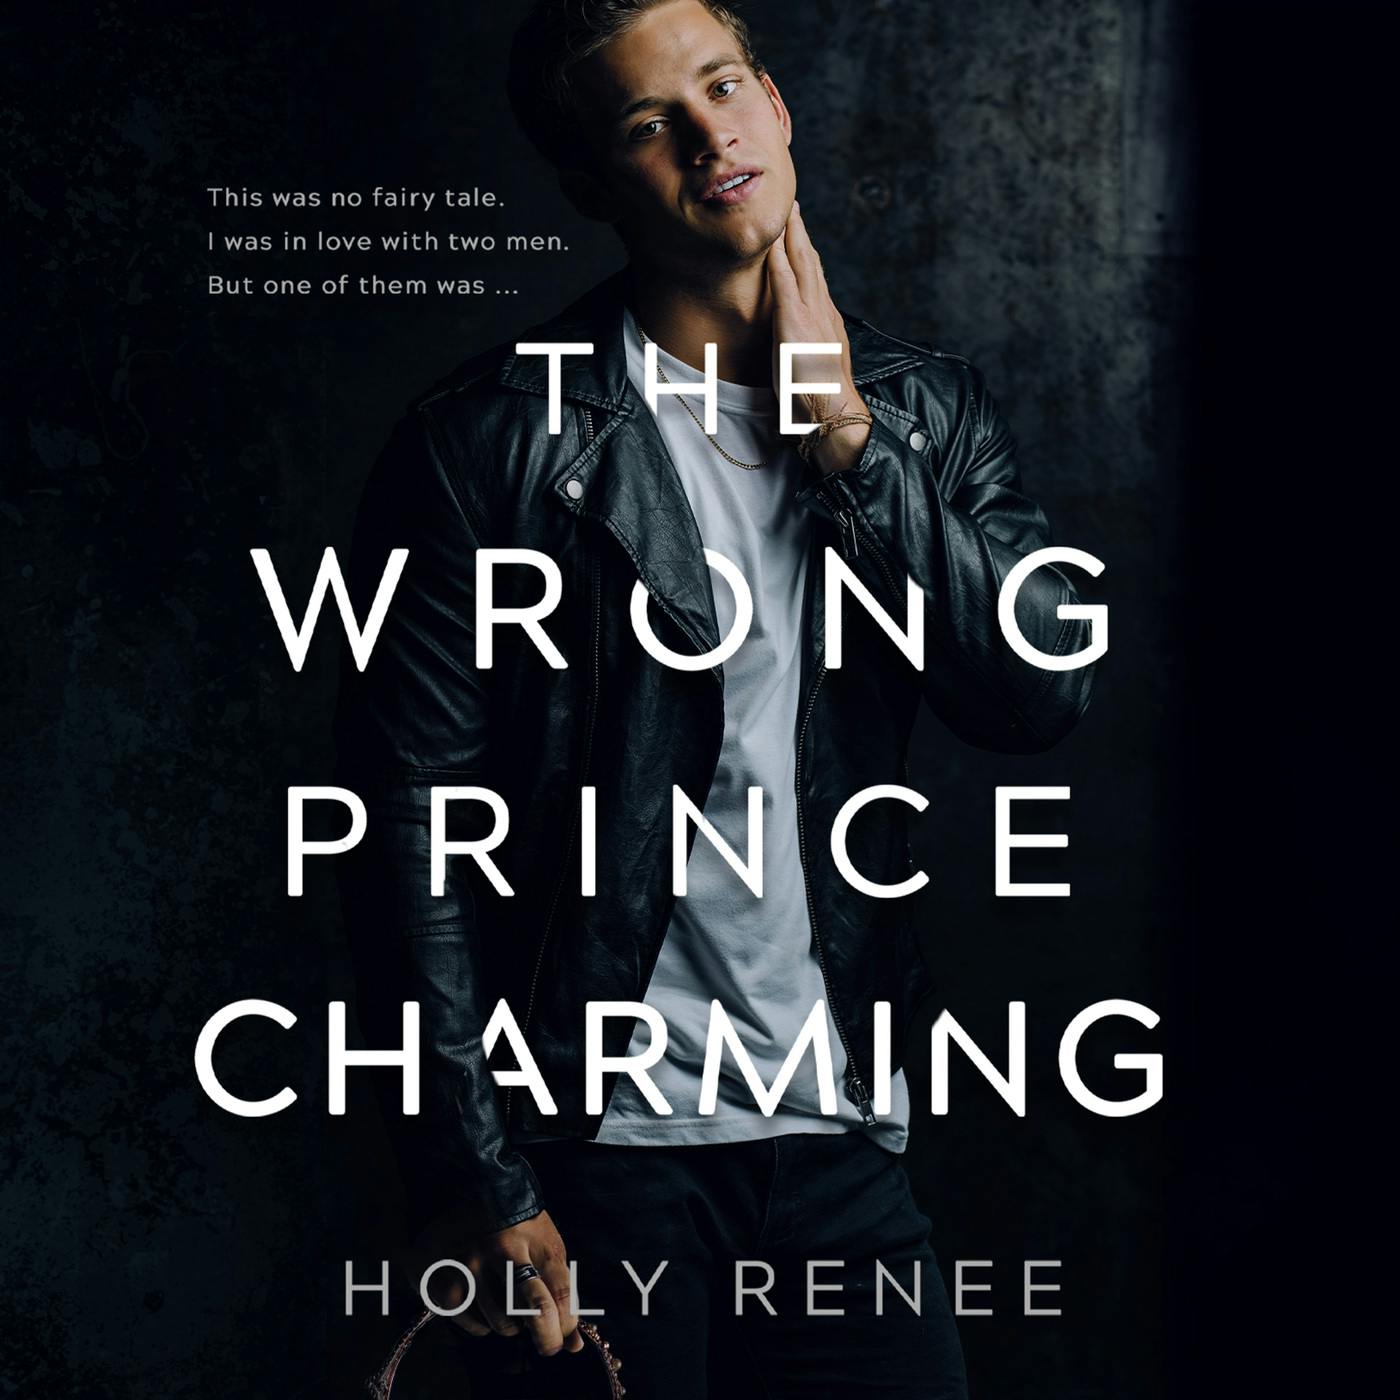 The Wrong Prince Charming (Unabridged) - undefined